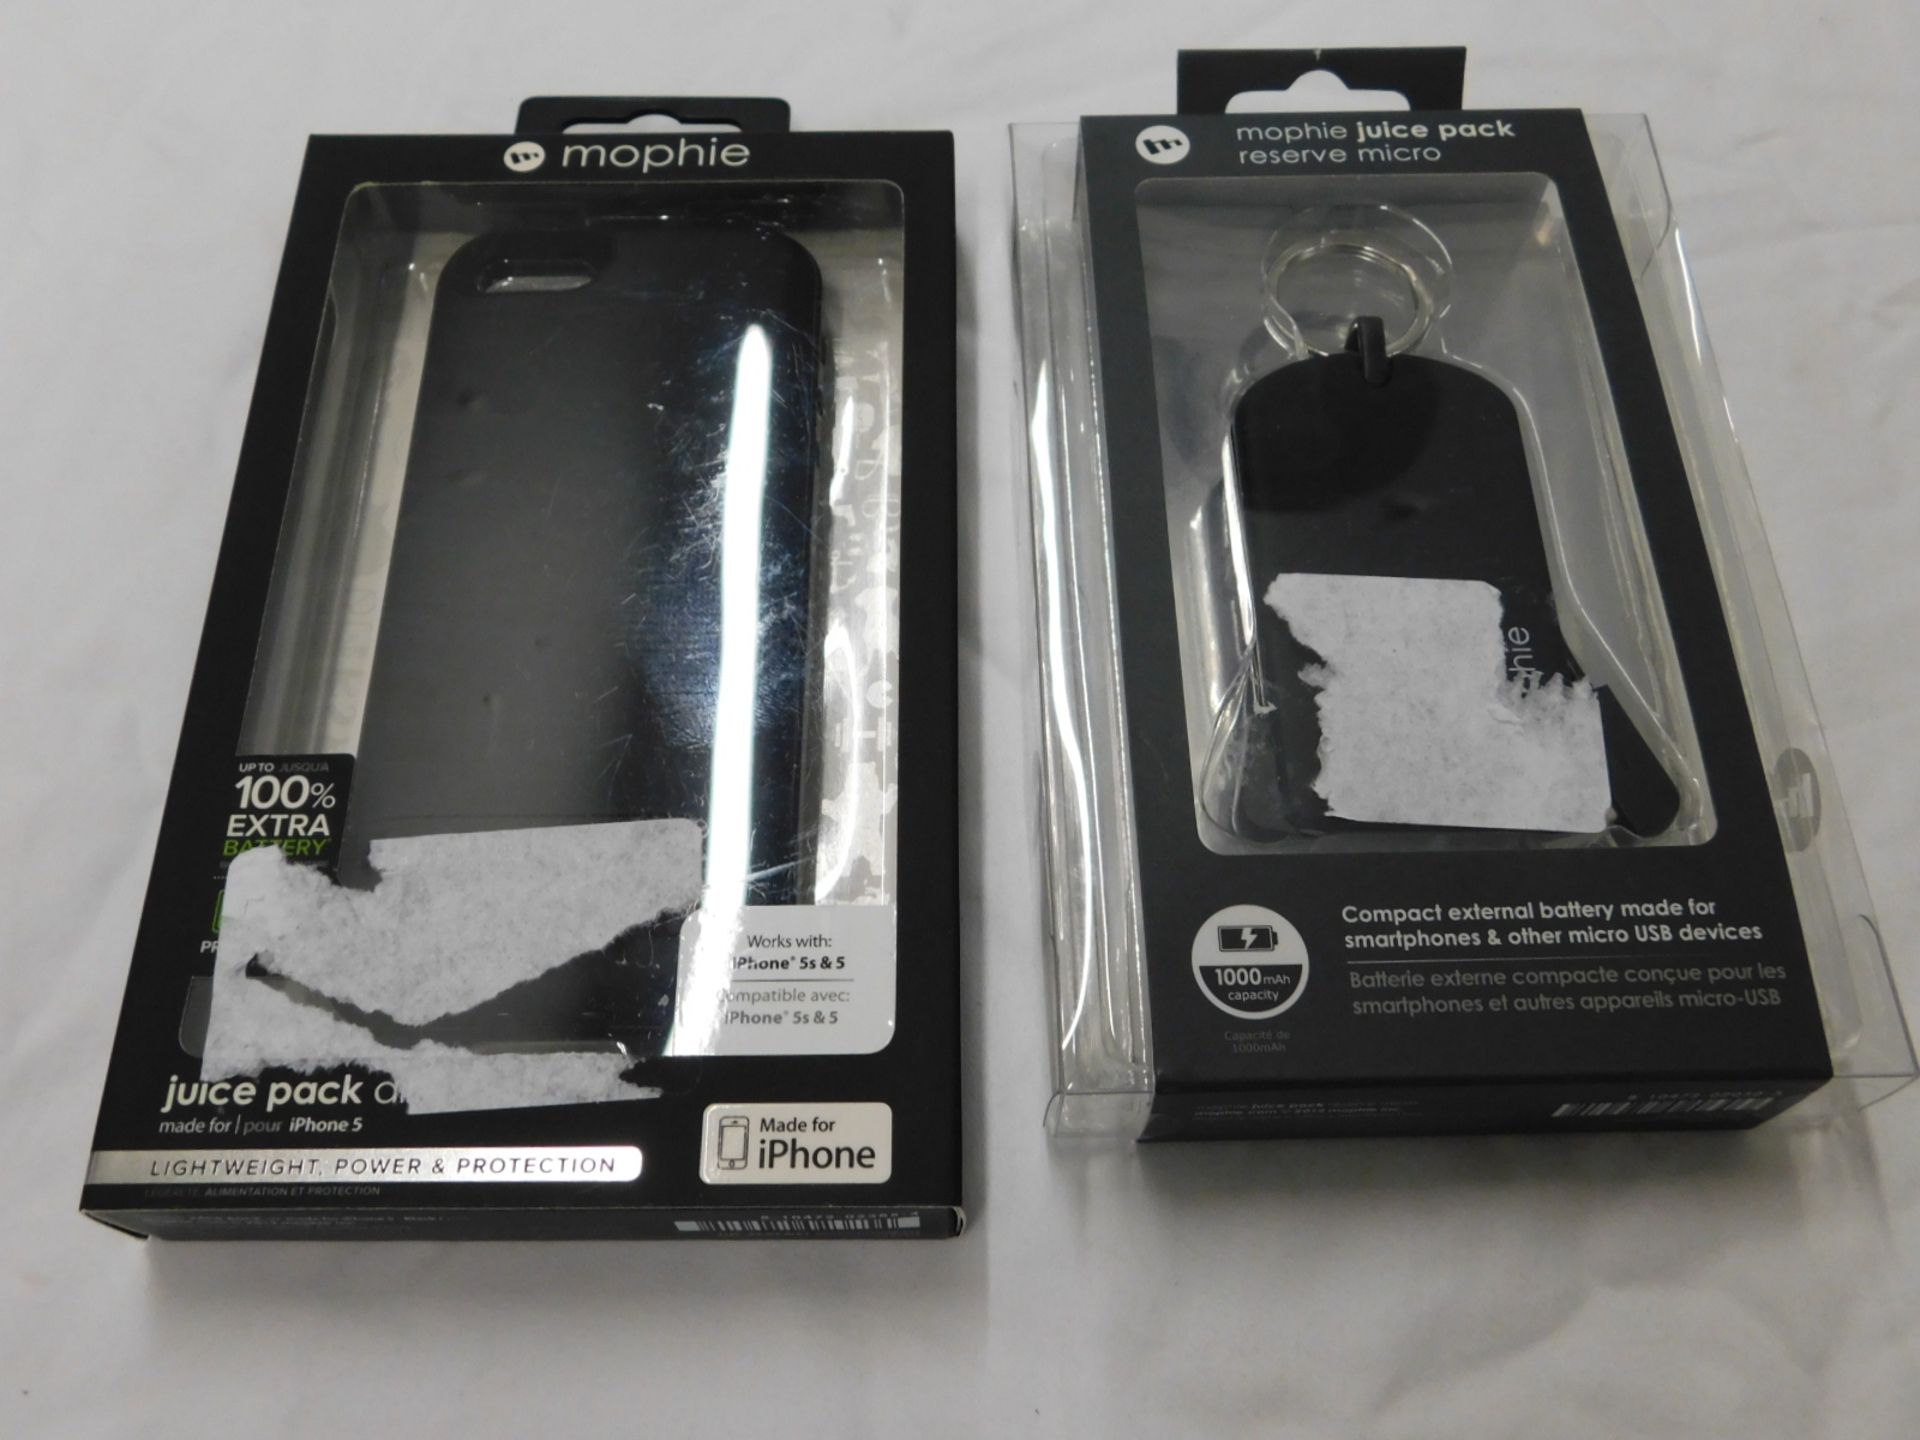 1 BRAND NEW BOXED MOPHIE JUICE PACK RESERVE MICRO AND JUICE PACK AIR FOR IPHONE 5/5S RRP £99.99